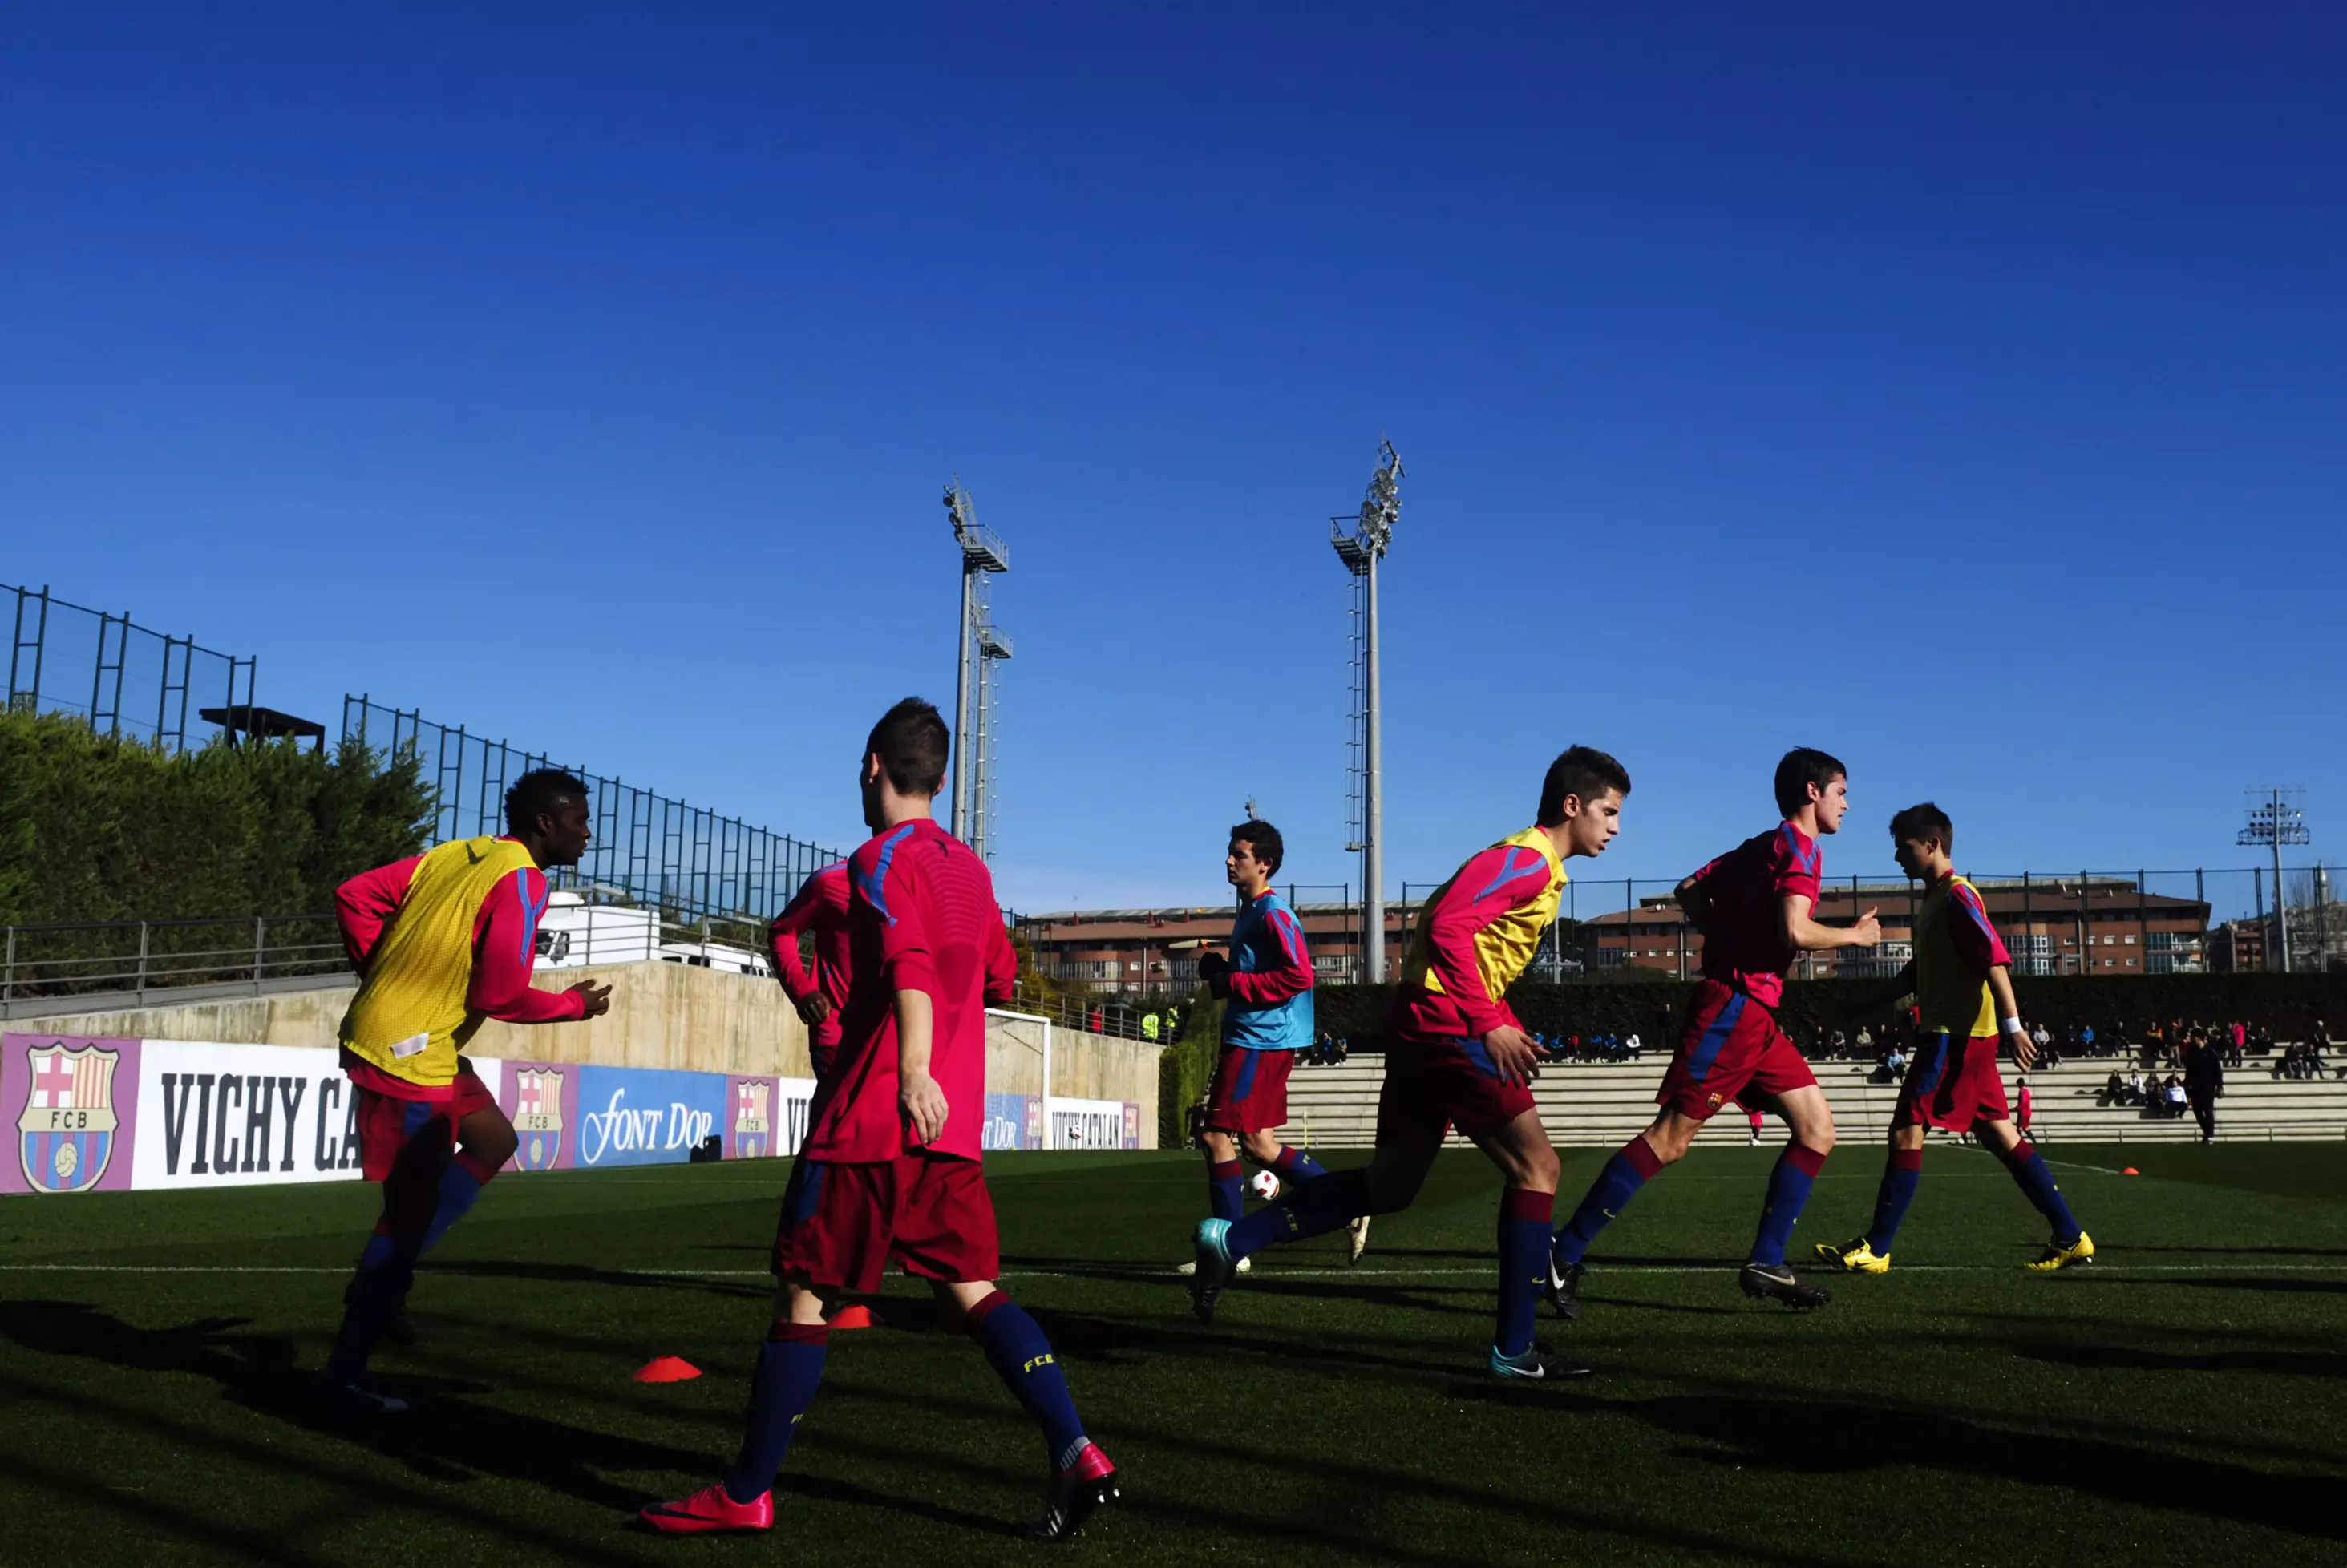 WATCH: This Week’s “Top Goals” From Barcelona's La Masia Is Lovely Viewing